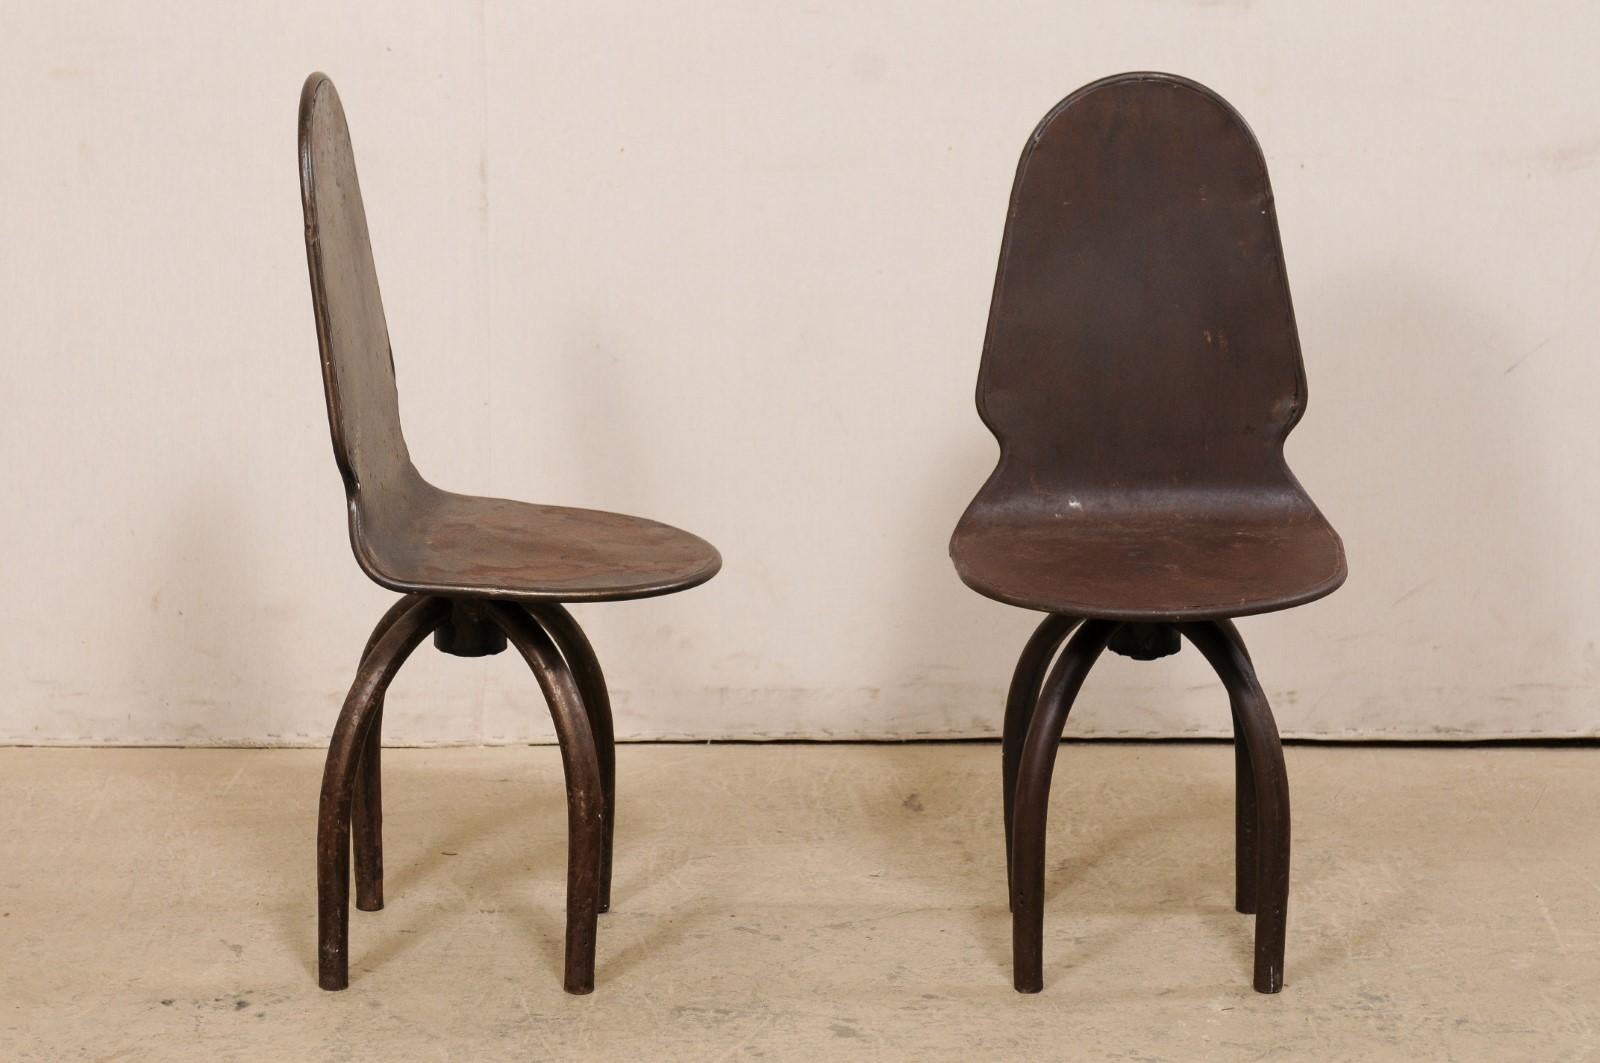 20th Century Spanish Pair of Iron Swivel Chairs on Spider-Style Legs, Industrial-Chic For Sale